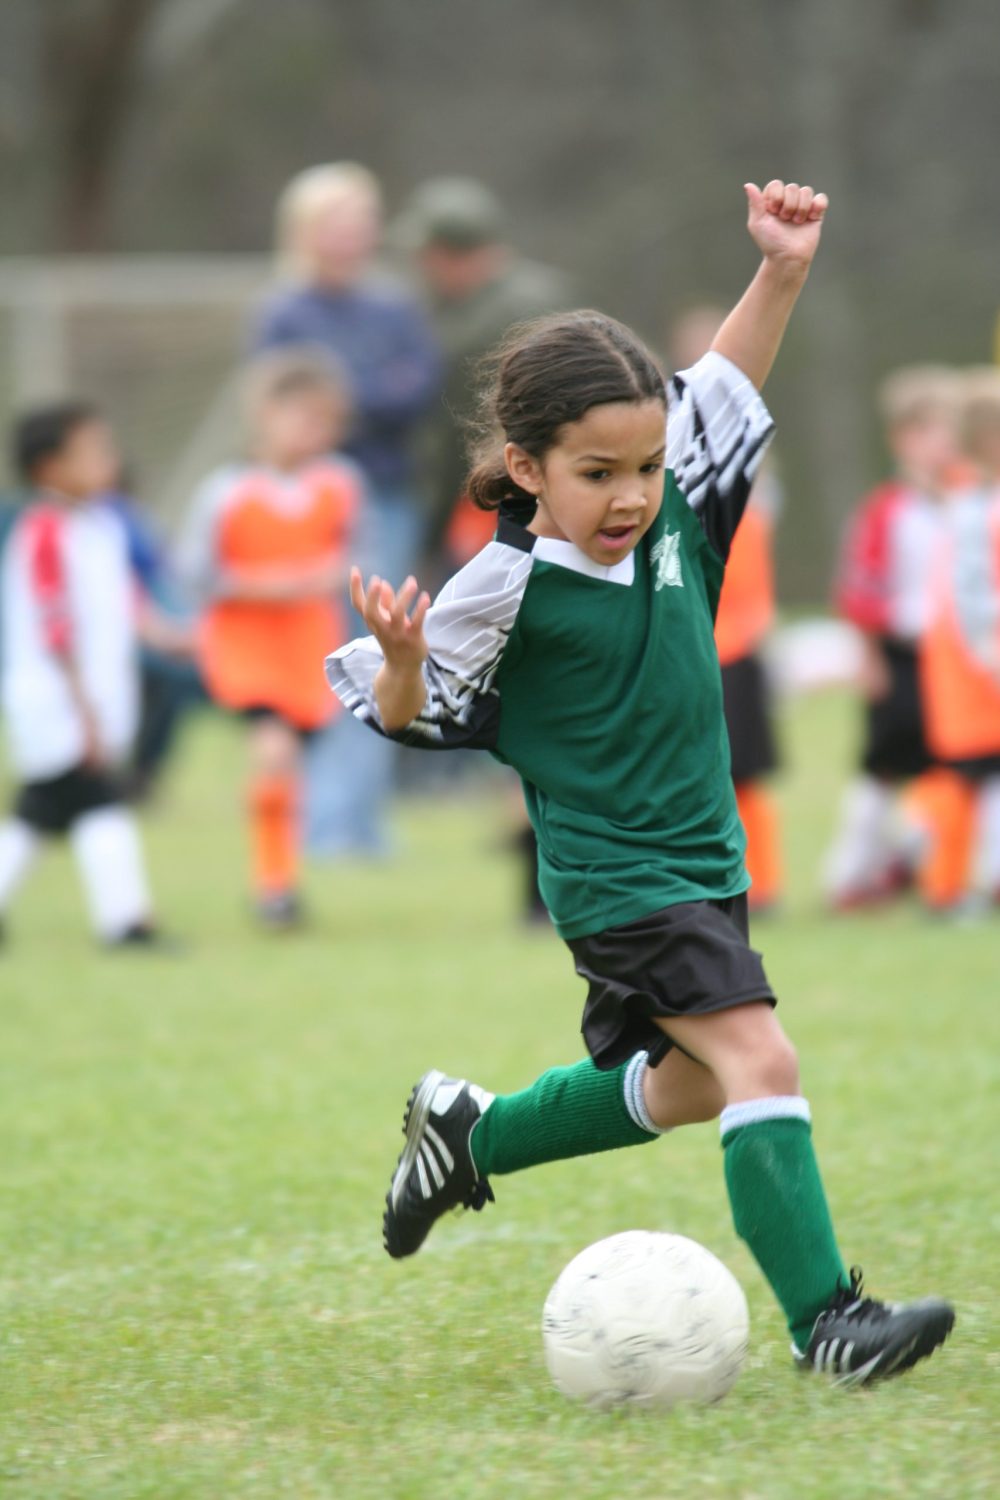 Boy dressed in green, playing football on the field